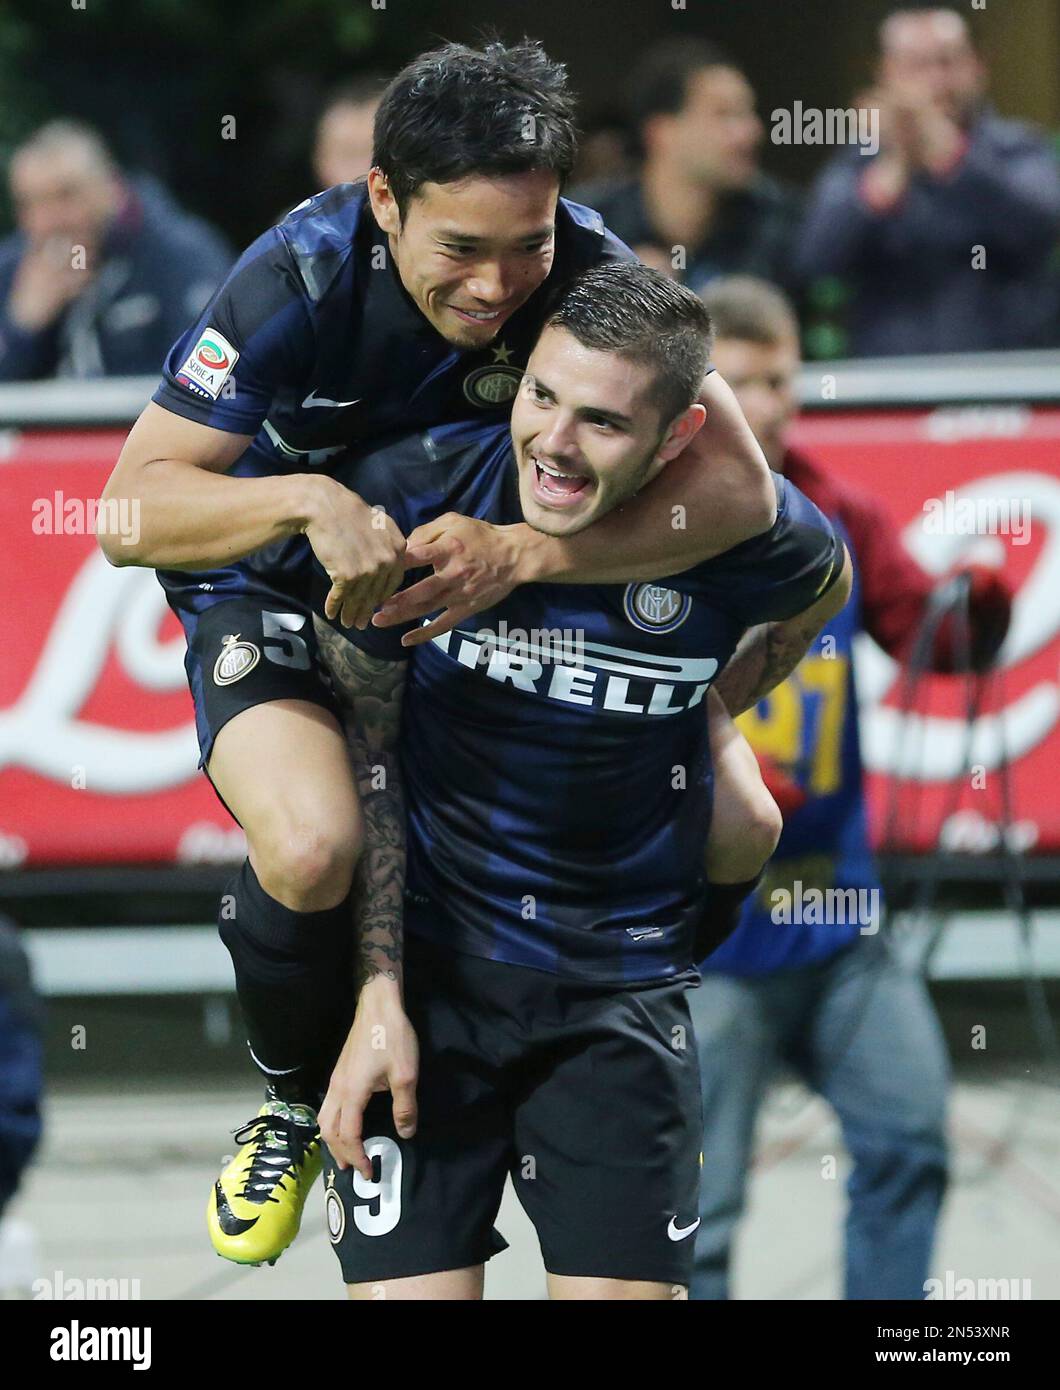 Inter Milan forward Mauro Icardi, right, of Argentina, celebrates with his  teammate defender Yuto Nagatomo, of Japan, after scoring during the Serie A  soccer match between Inter Milan and Bologna at the